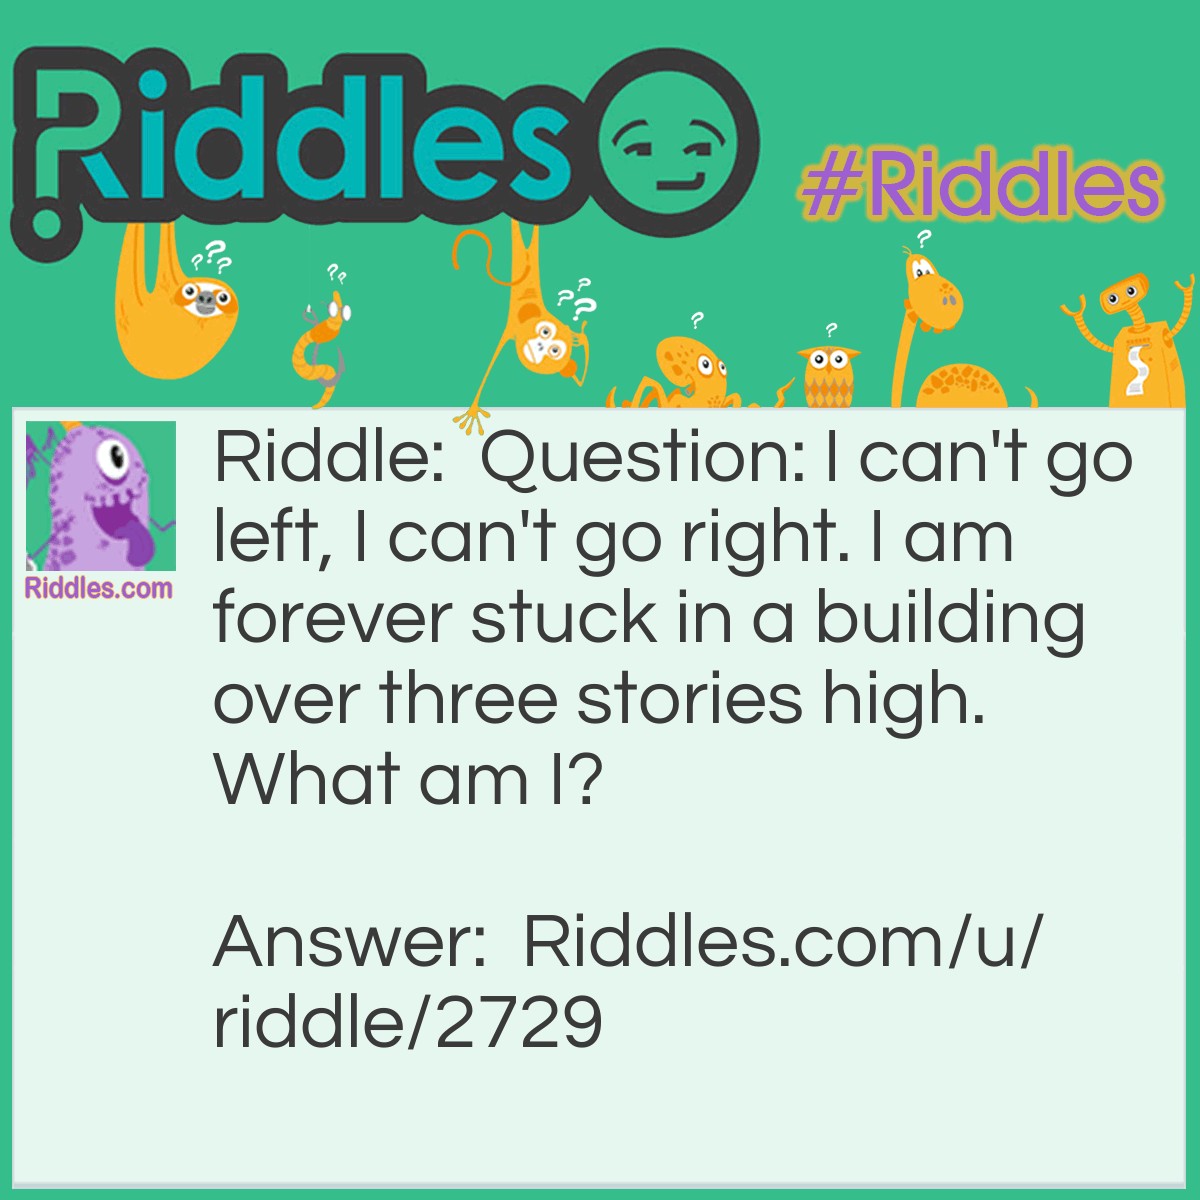 Riddle: Question: I can't go left, I can't go right. I am forever stuck in a building over three stories high. What am I? Answer: An Elevator.